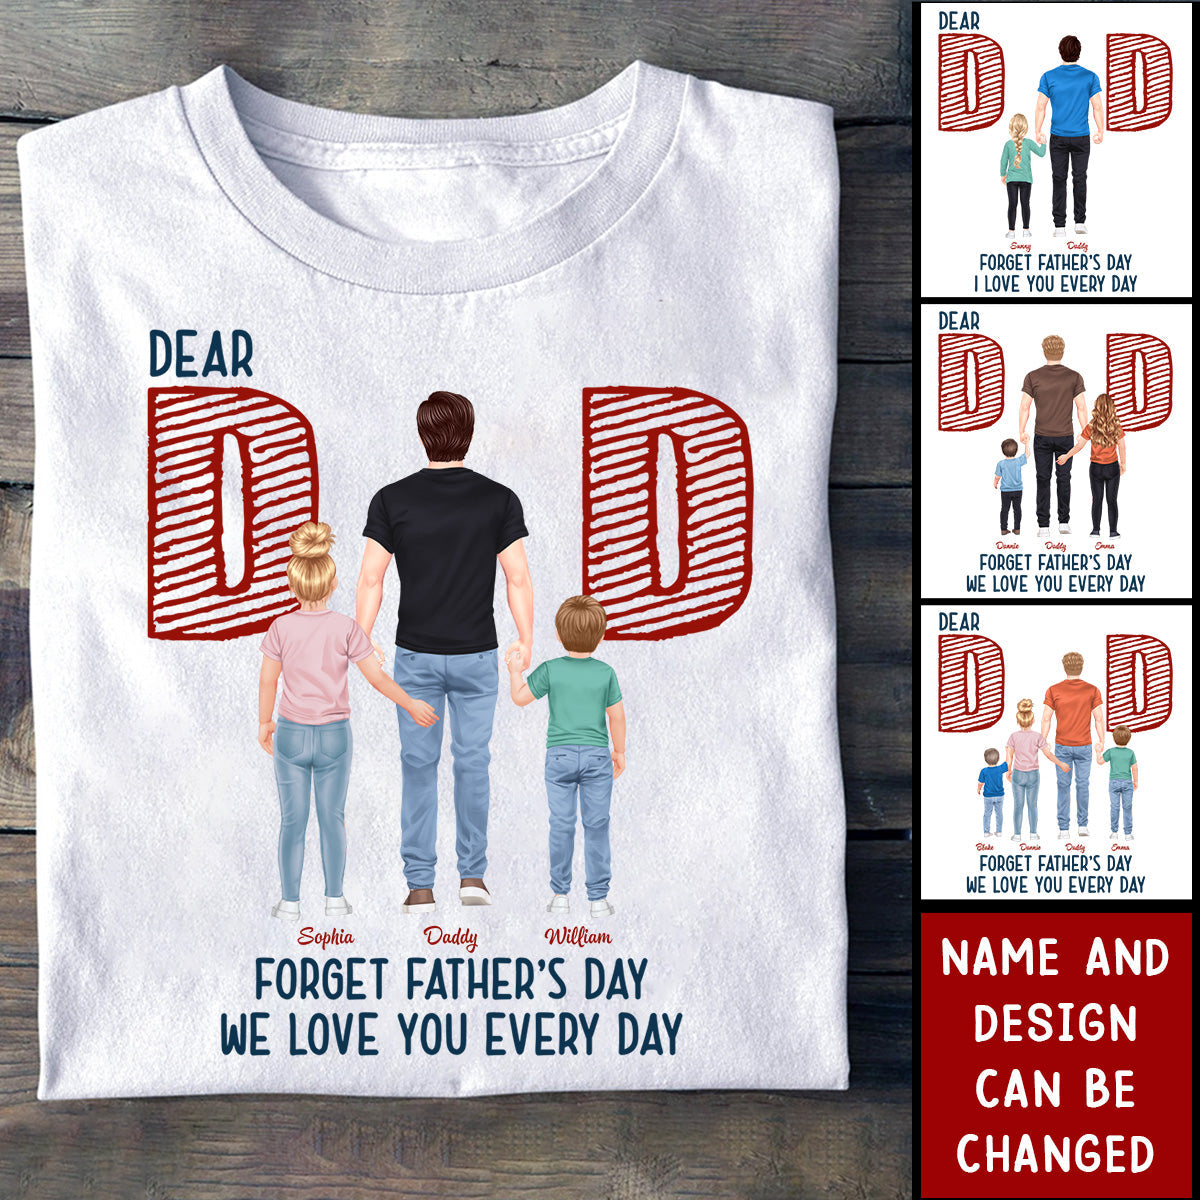 Dear Dad Forget Father's Day We Love You Every Day - Personalized T-Shirt